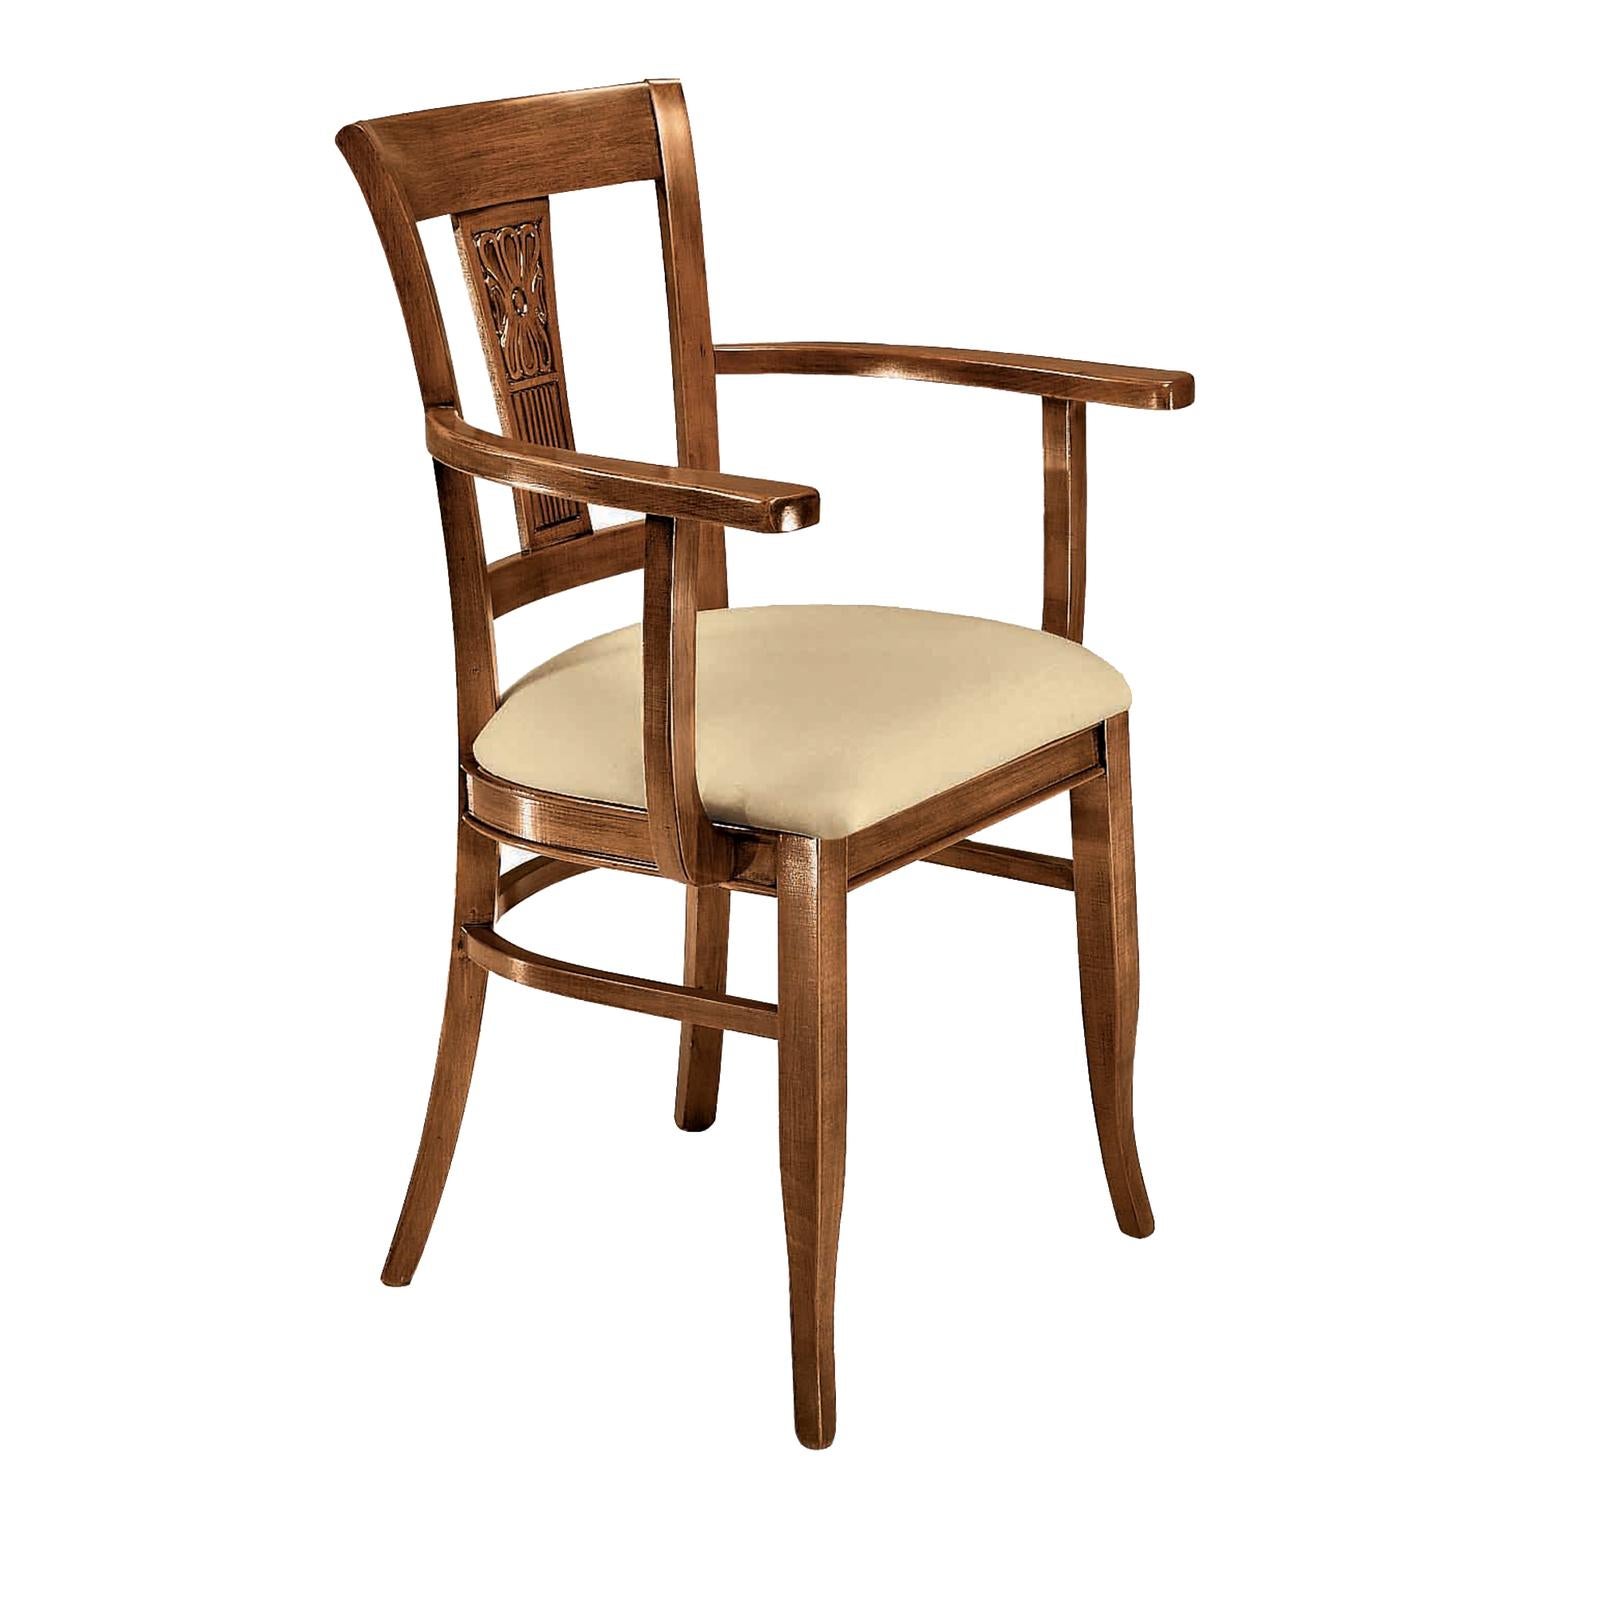 A Classic Silhouette infused with modern charm, this skilfully crafted wooden chair is characterized by a rectangular frame with a bold central wooden splat and lower rail. The square cushion seat is upholstered in ivory fabric, supported by flared,